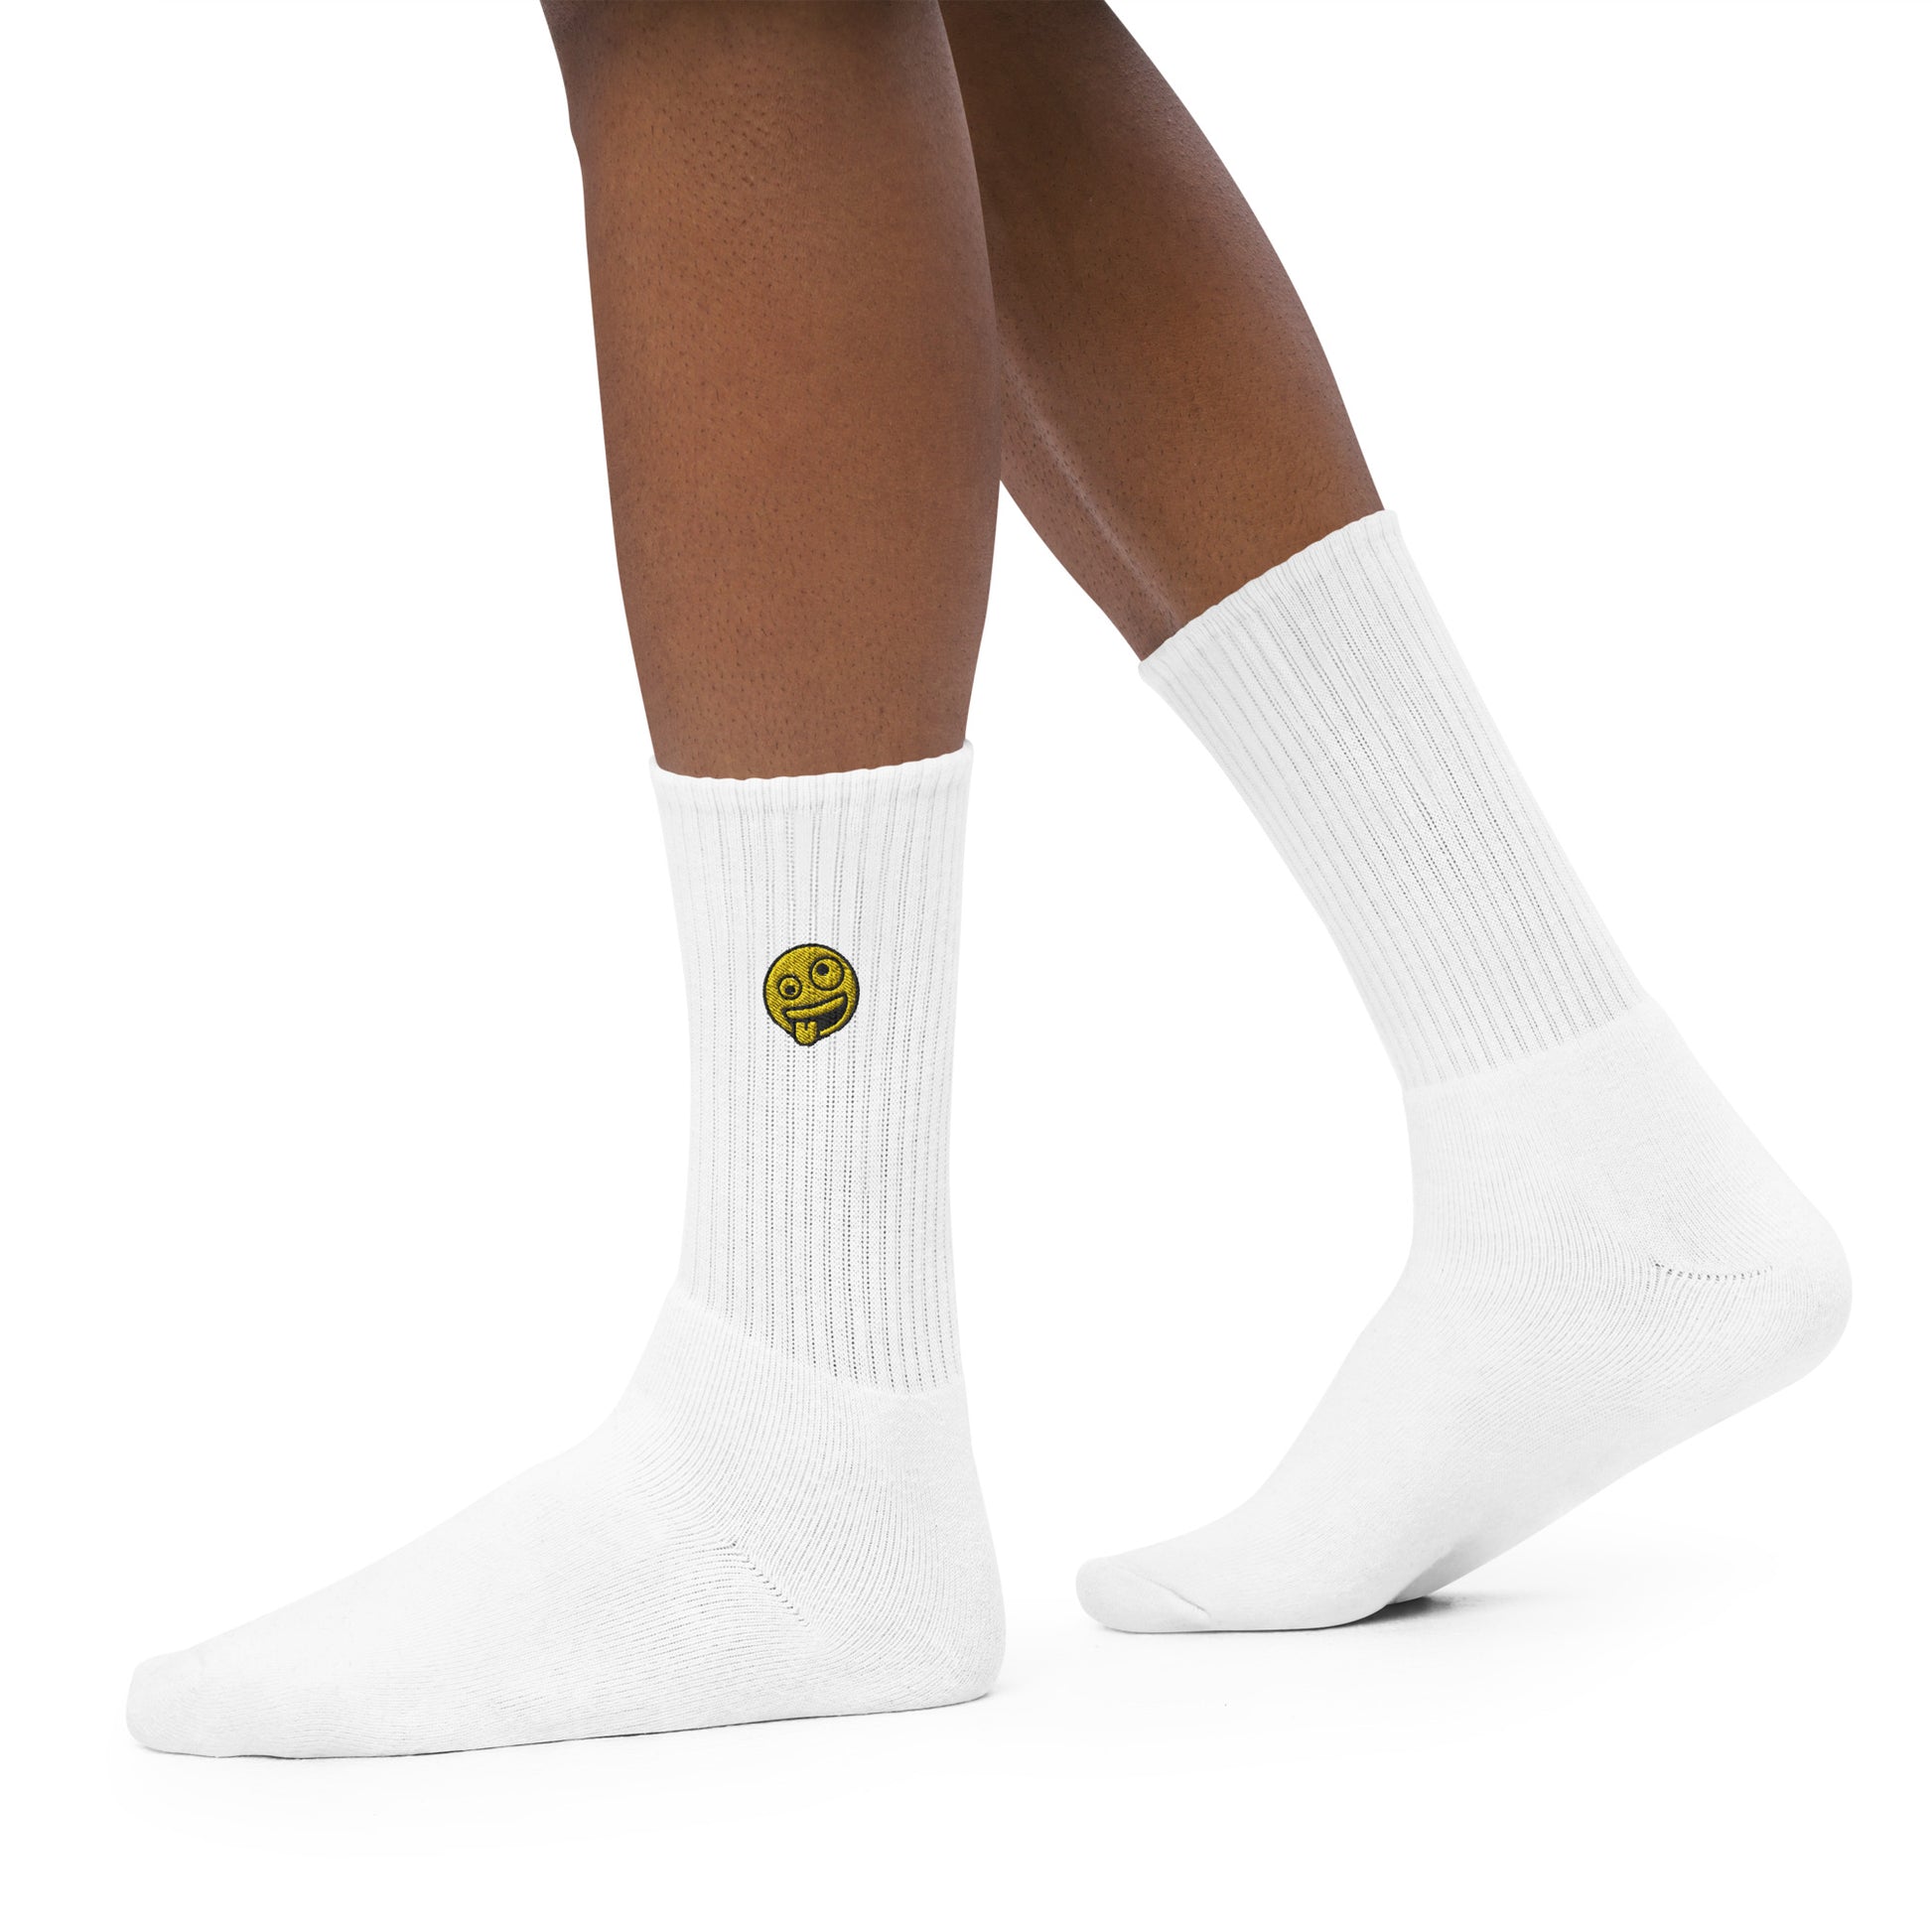 socks-from-the-side-with-emoji-symbol